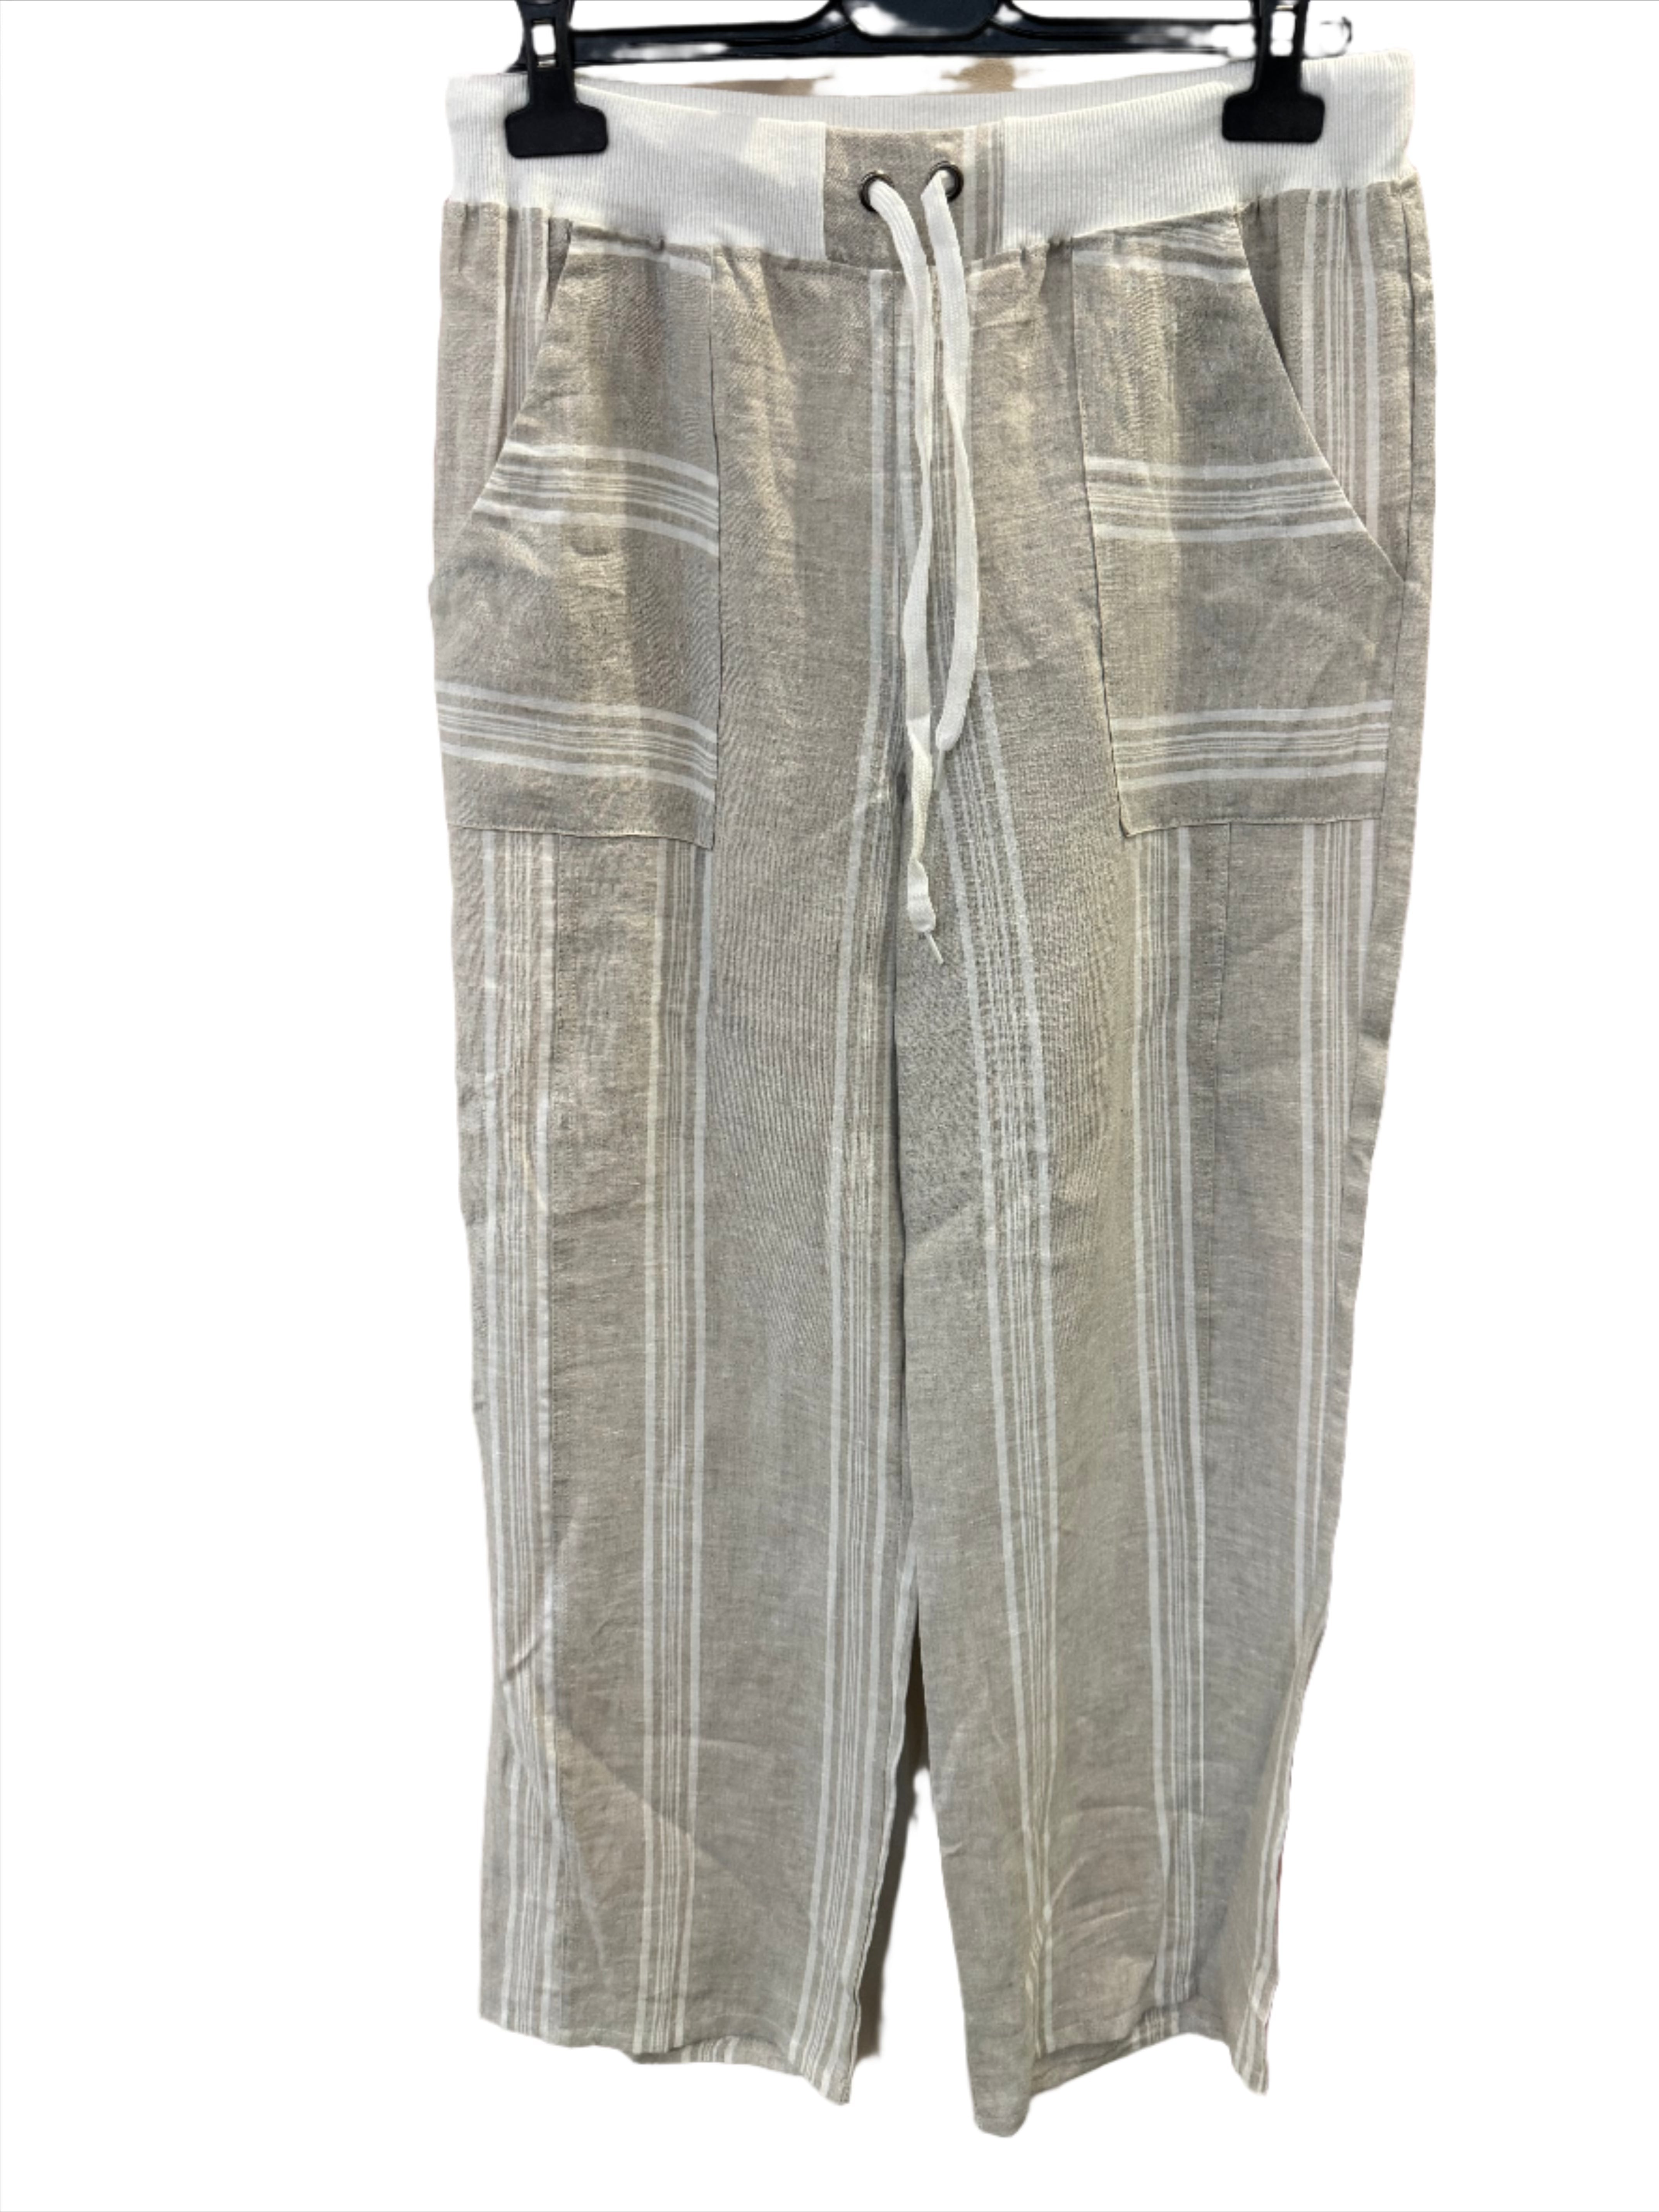 Inizio Linen Draw String Pant